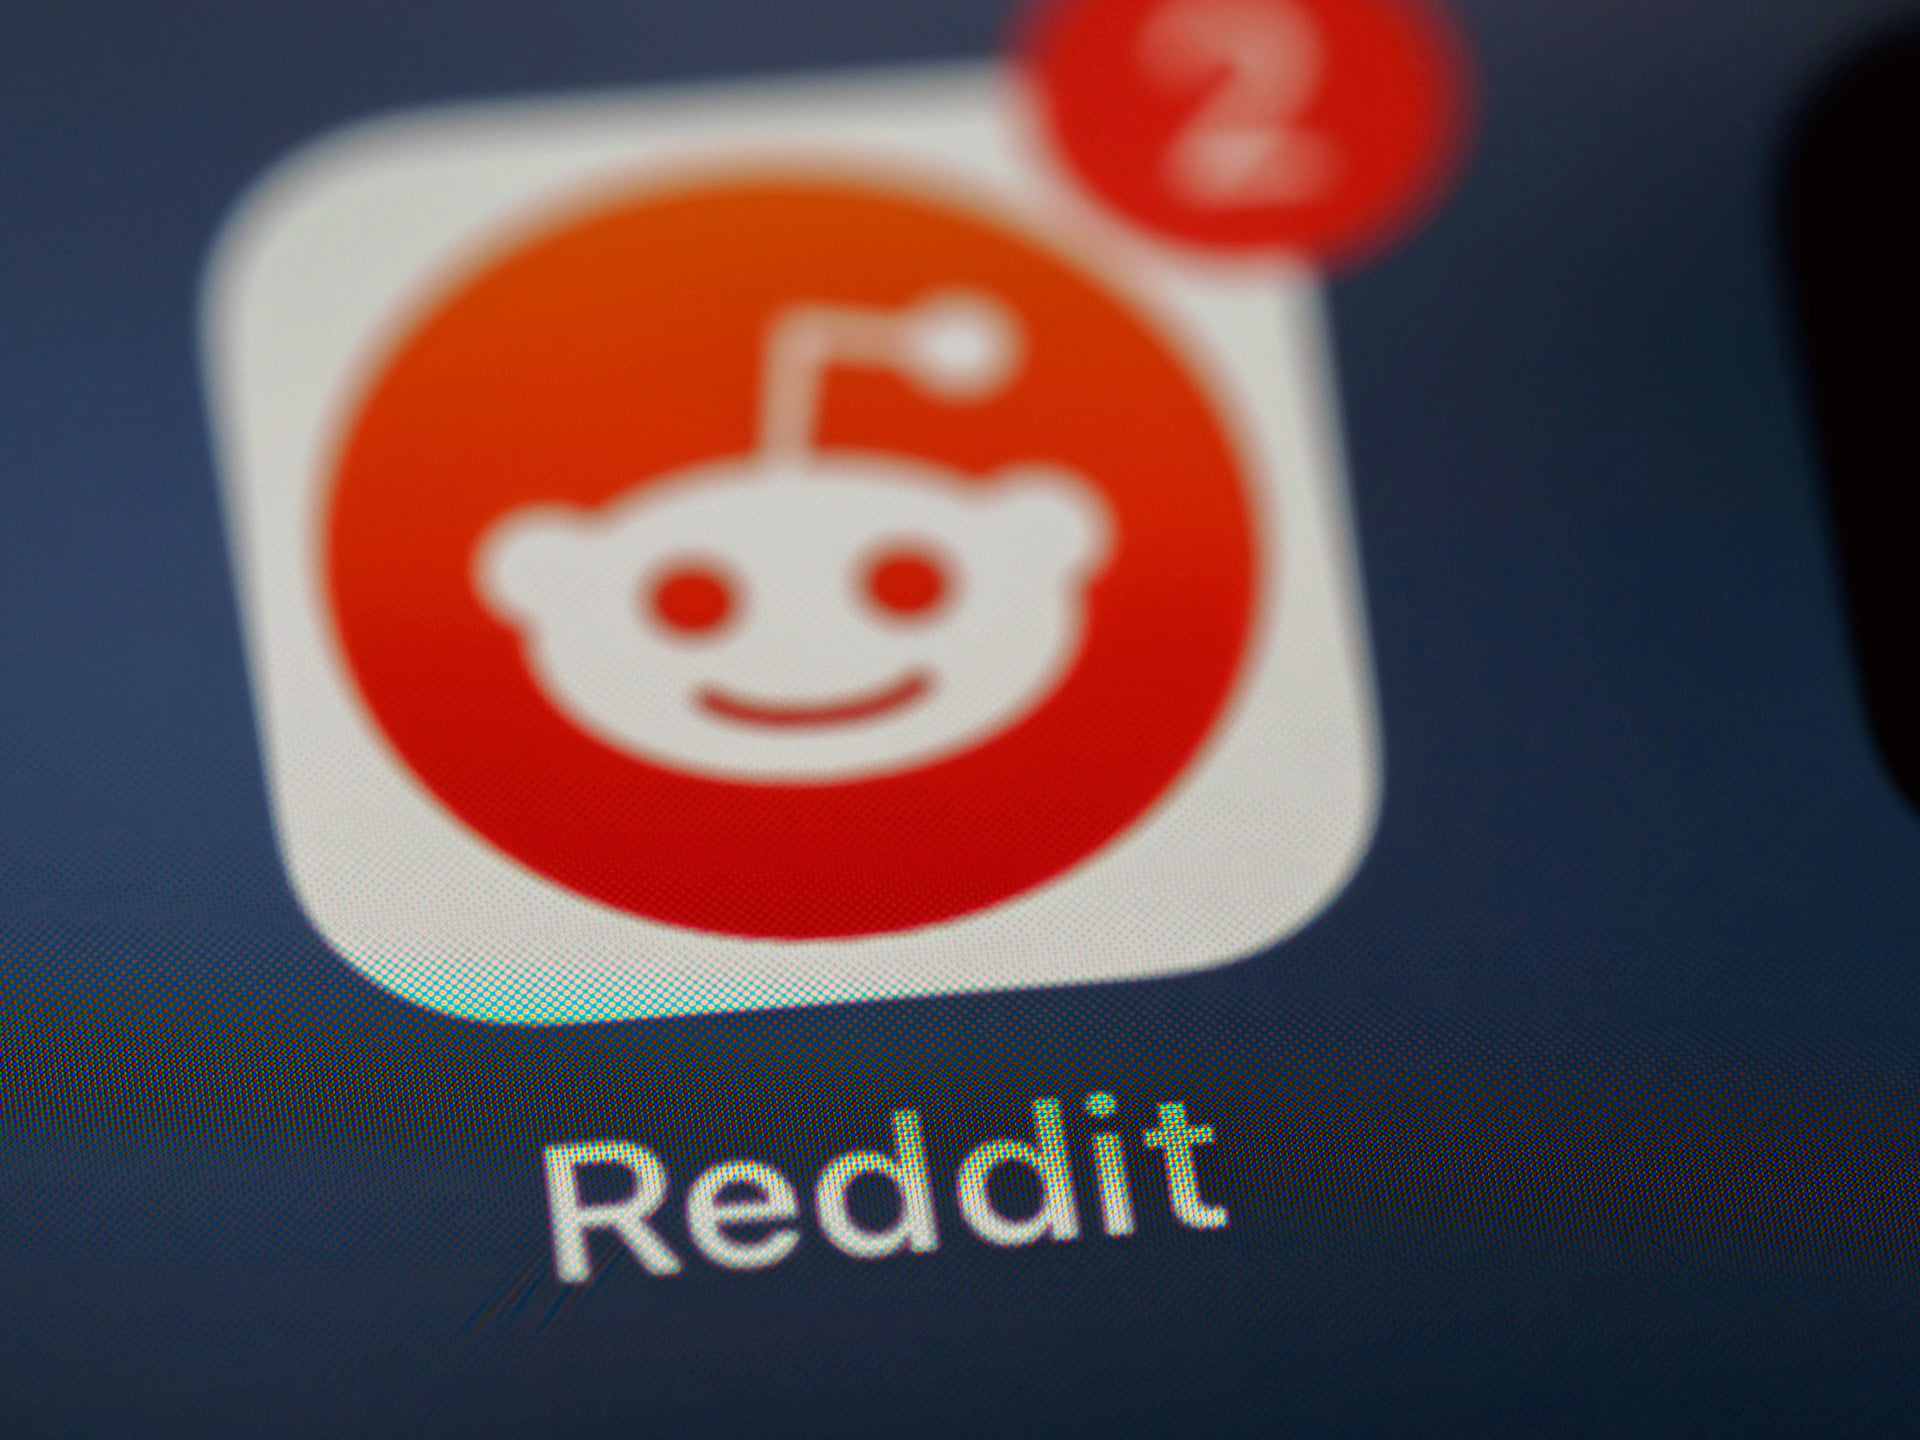 YouTube and Reddit also announce sanctions against Russian media